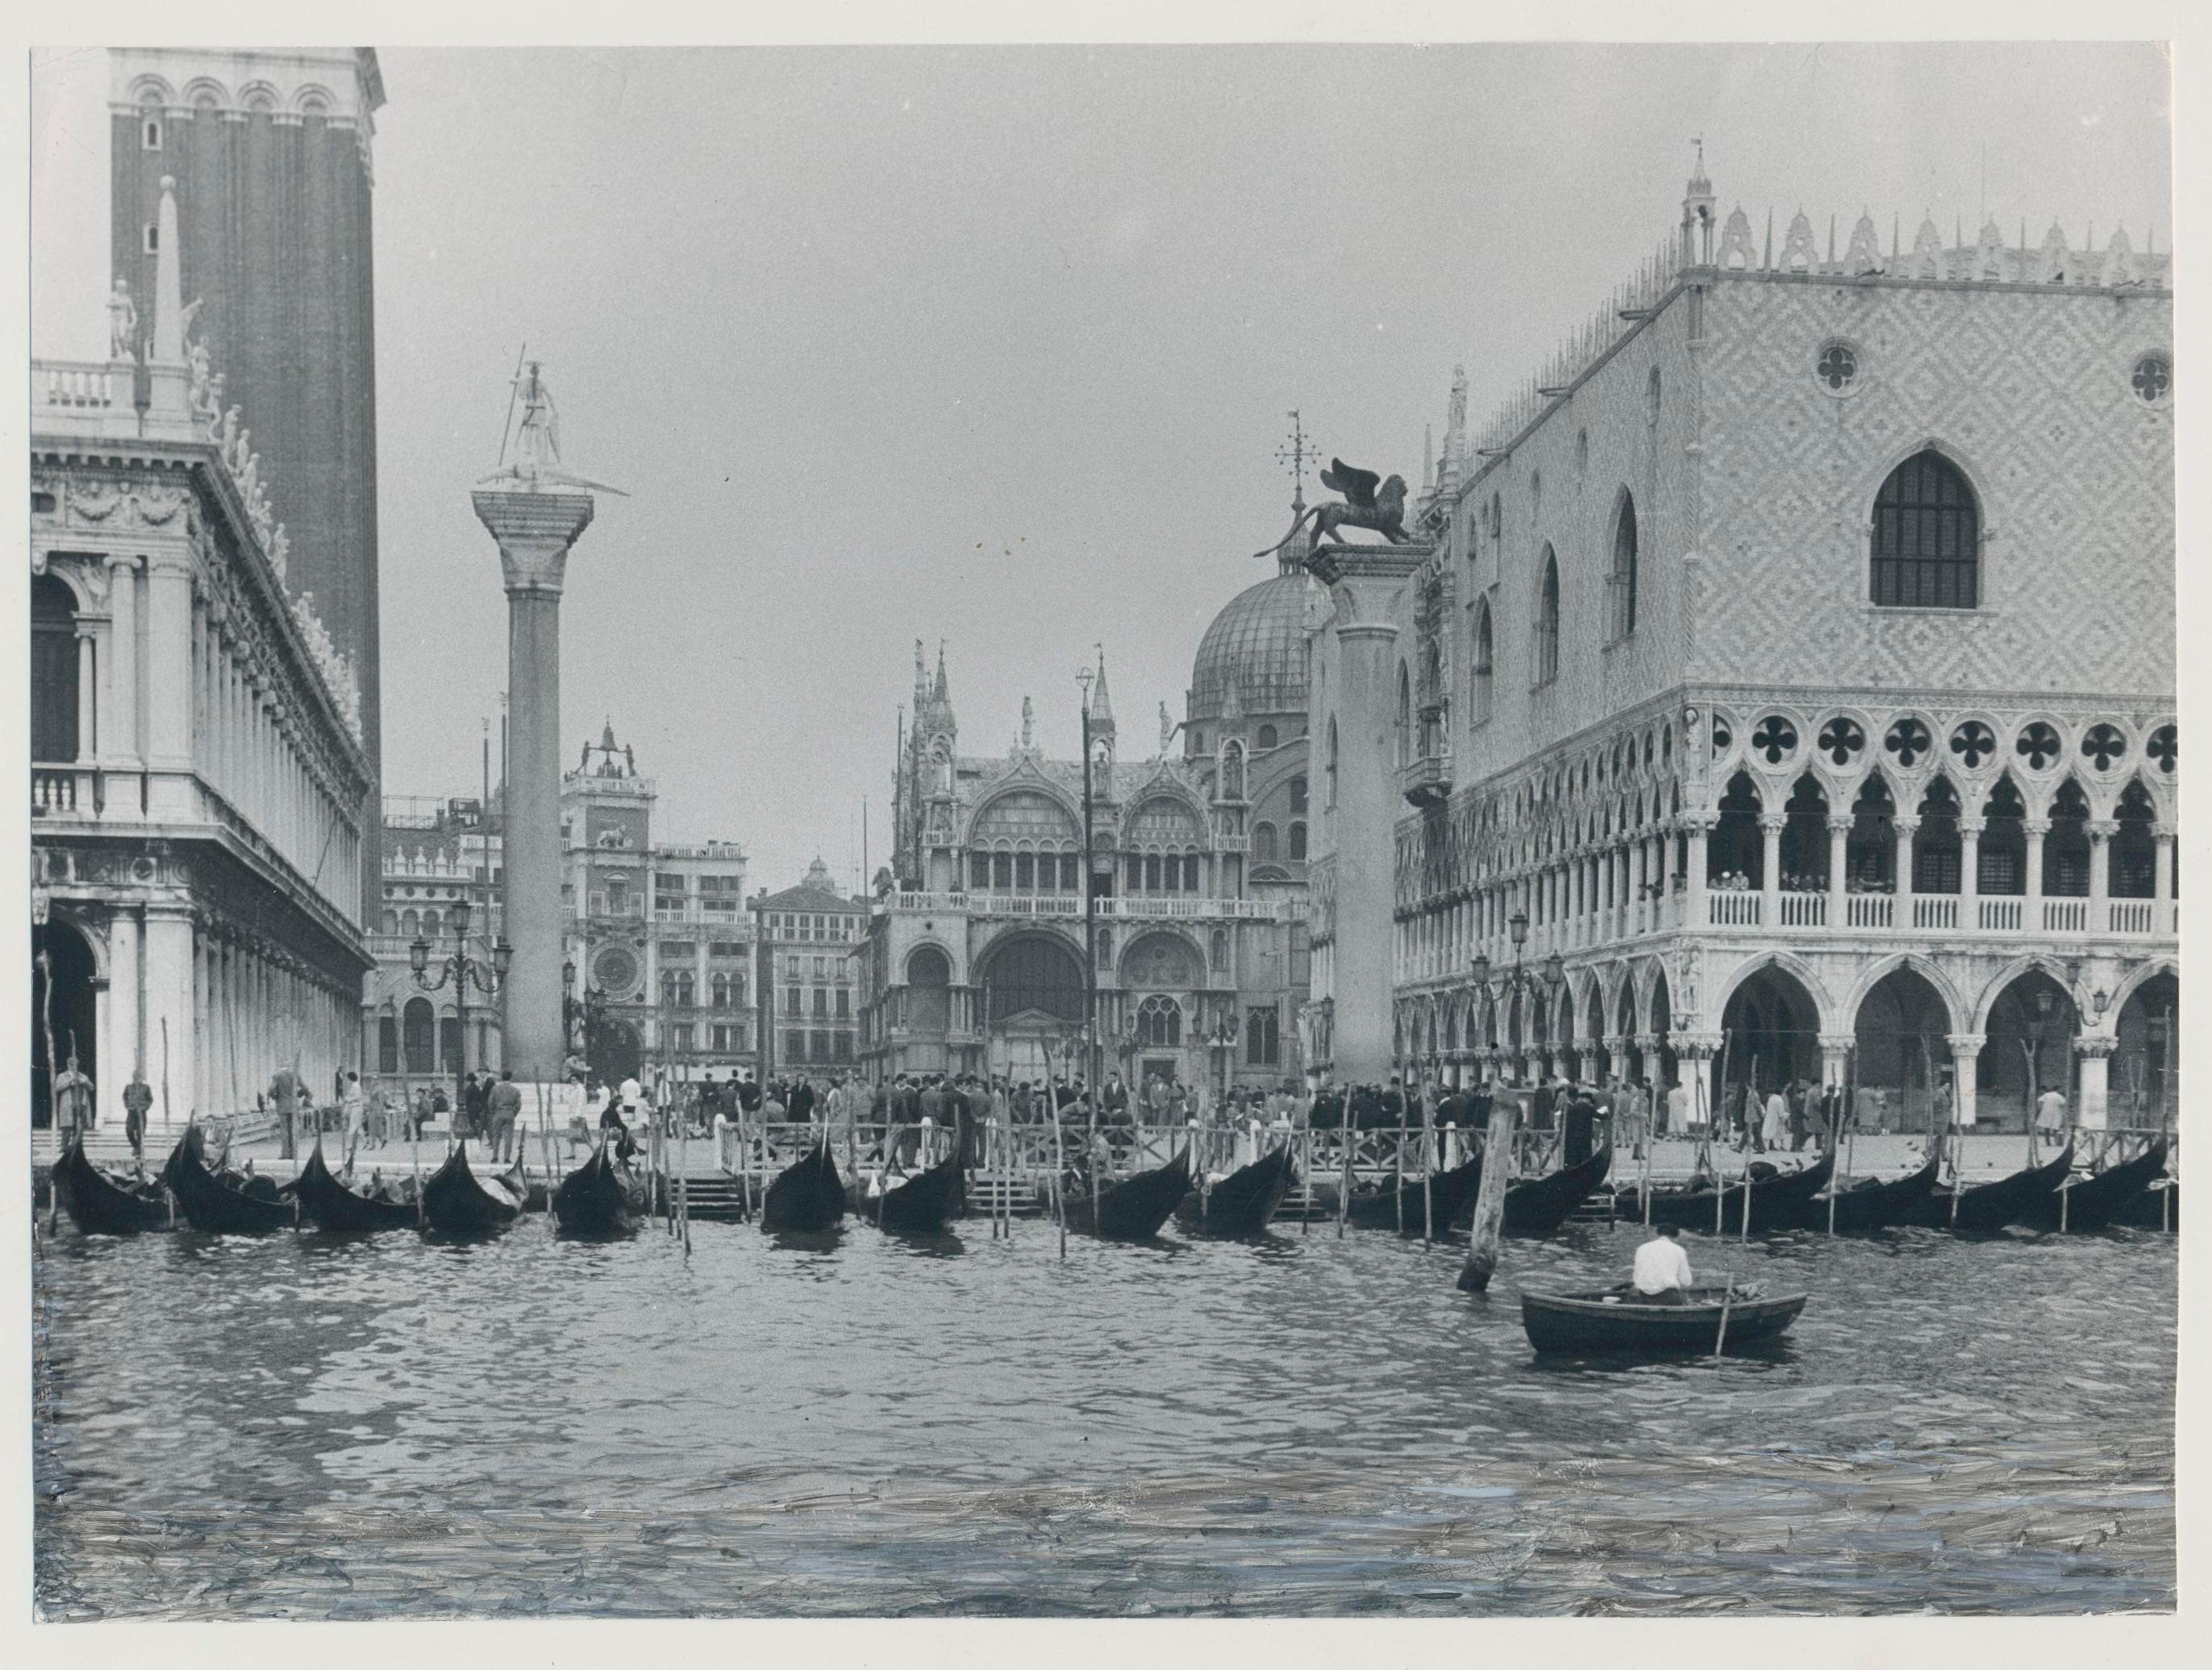 Erich Andres Black and White Photograph - Venice - Piazzetta San Marco with Gondolas, Italy, 1950s, 16, 5 x 22, 6 cm